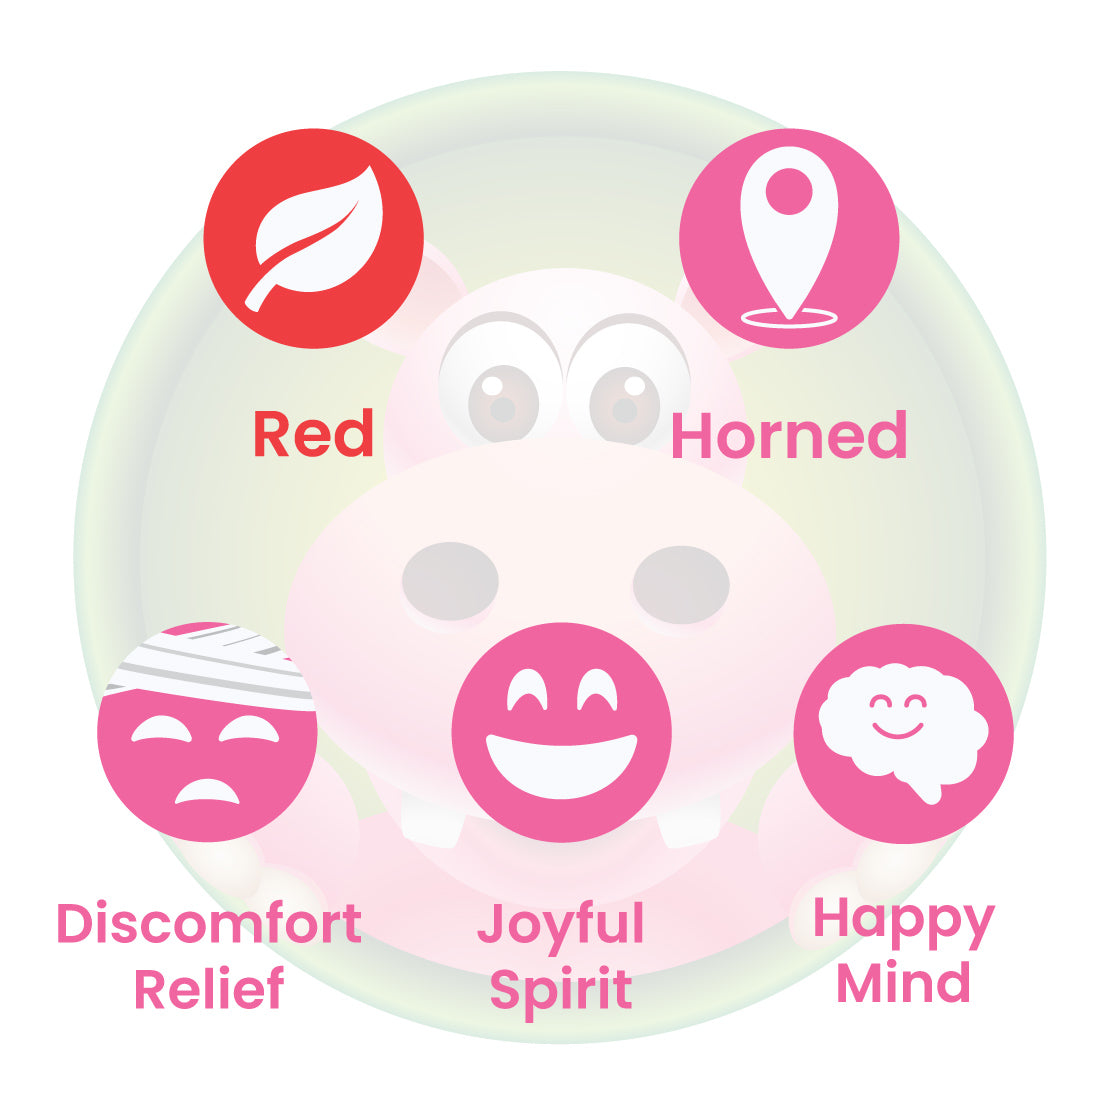 Infographic Details for Happy Hippo Red Horn Kratom Powder. Leaf color: Red Vein. Kratom Strain Origin: Horned Leaf. Kratom Effects resonate with Relief from Physical Discomfort, Joyful Spirit, and Happy Mind.